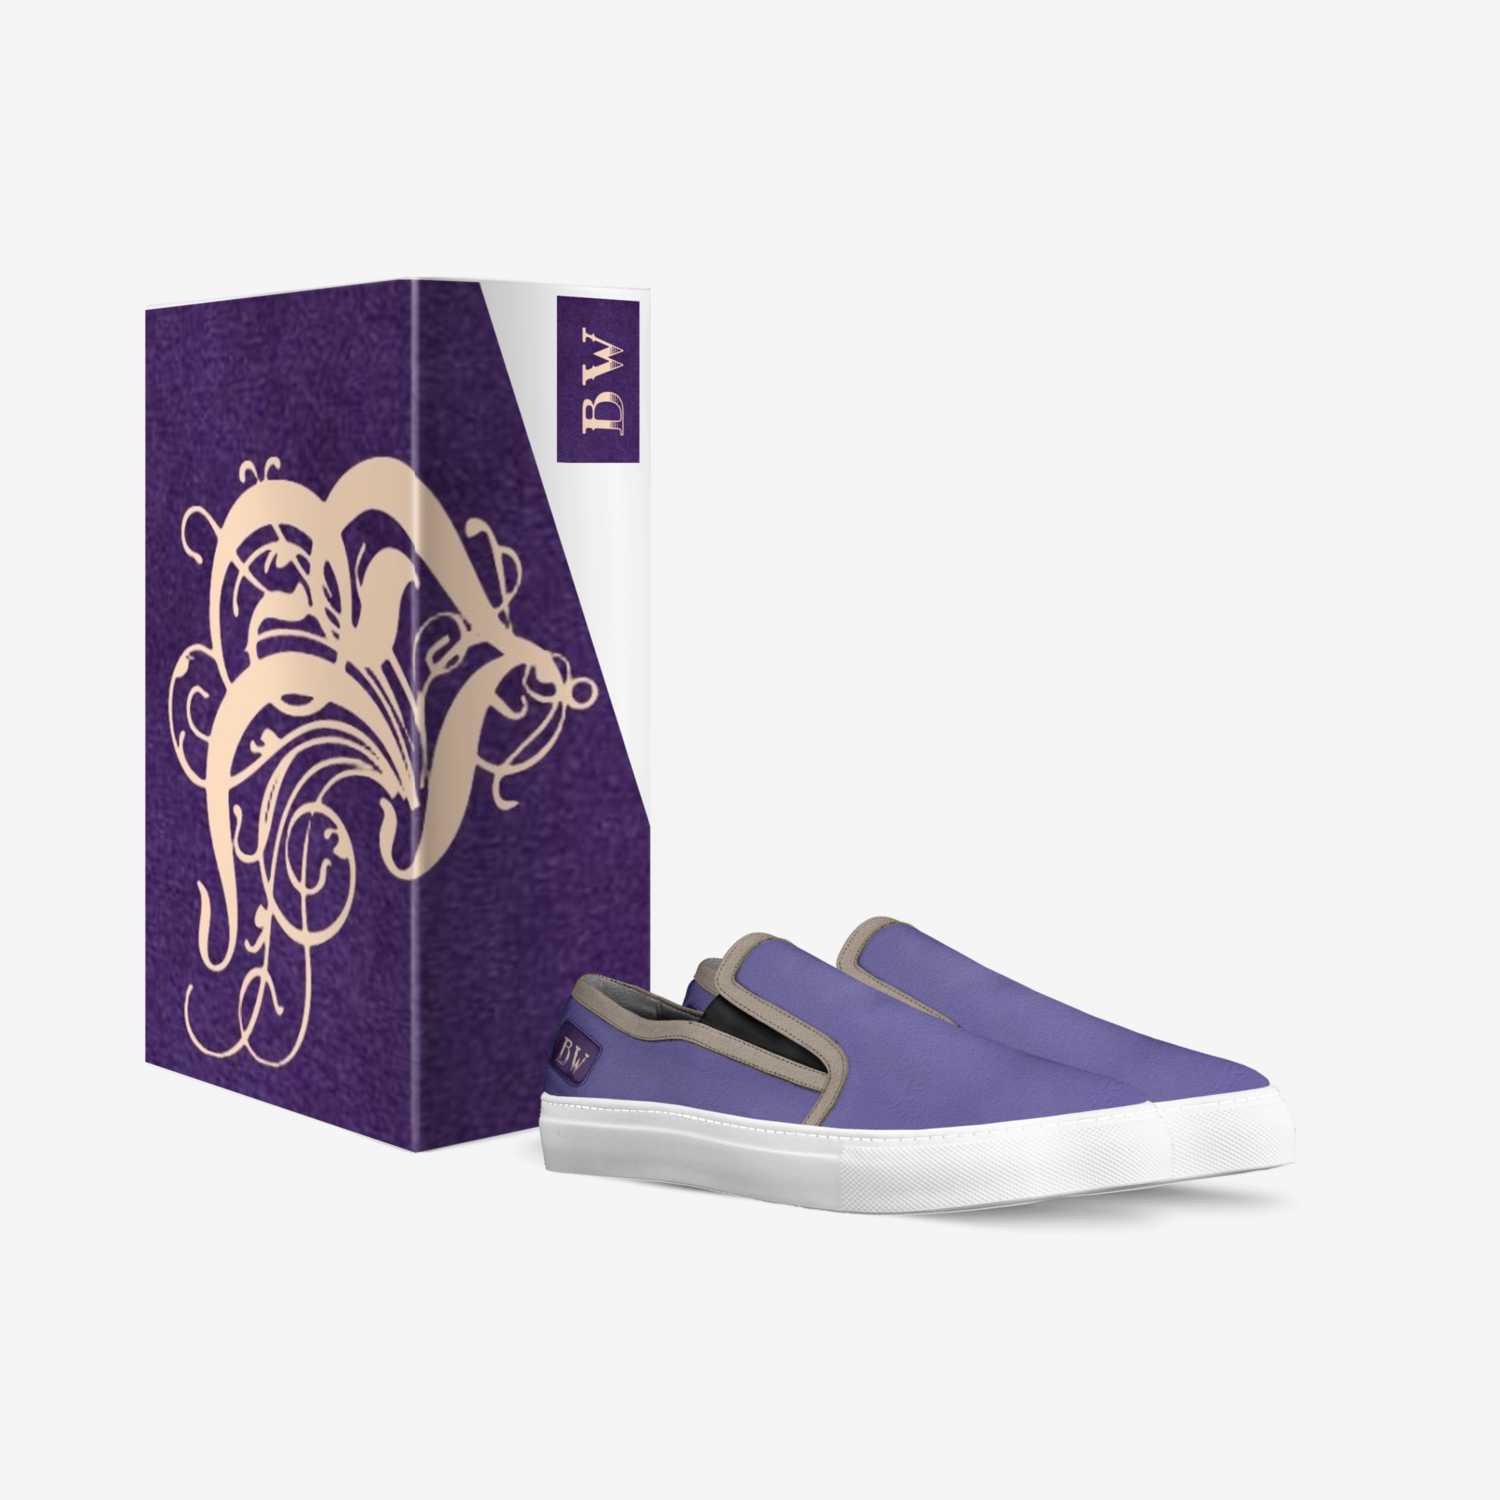 $lides-Violet custom made in Italy shoes by Garrett Berlier | Box view